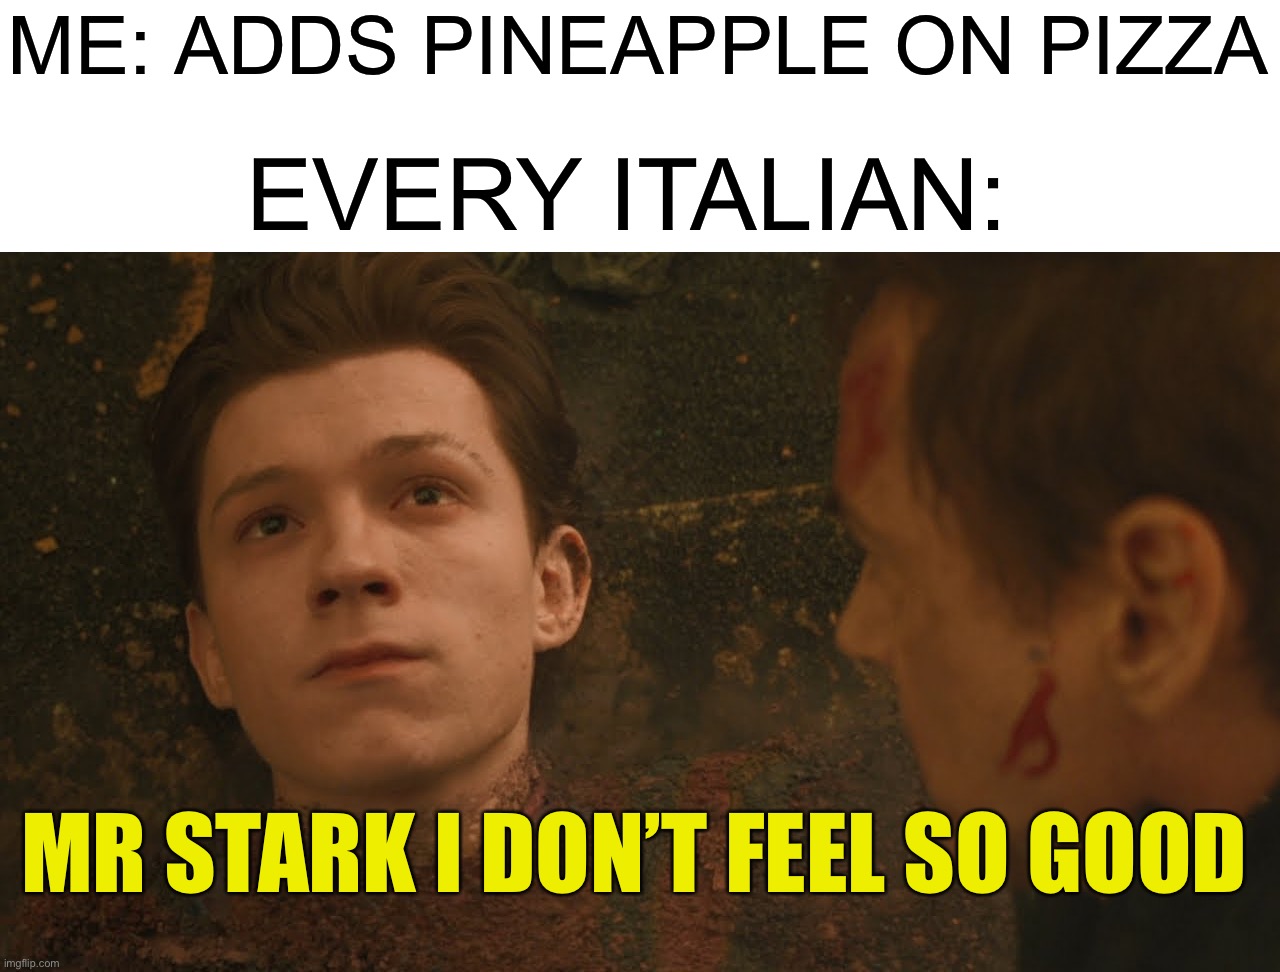 Pineapple does not belong in pizza |  ME: ADDS PINEAPPLE ON PIZZA; EVERY ITALIAN:; MR STARK I DON’T FEEL SO GOOD | image tagged in mr stark i don't feel so good,memes,funny,pizza,pineapple,eww | made w/ Imgflip meme maker